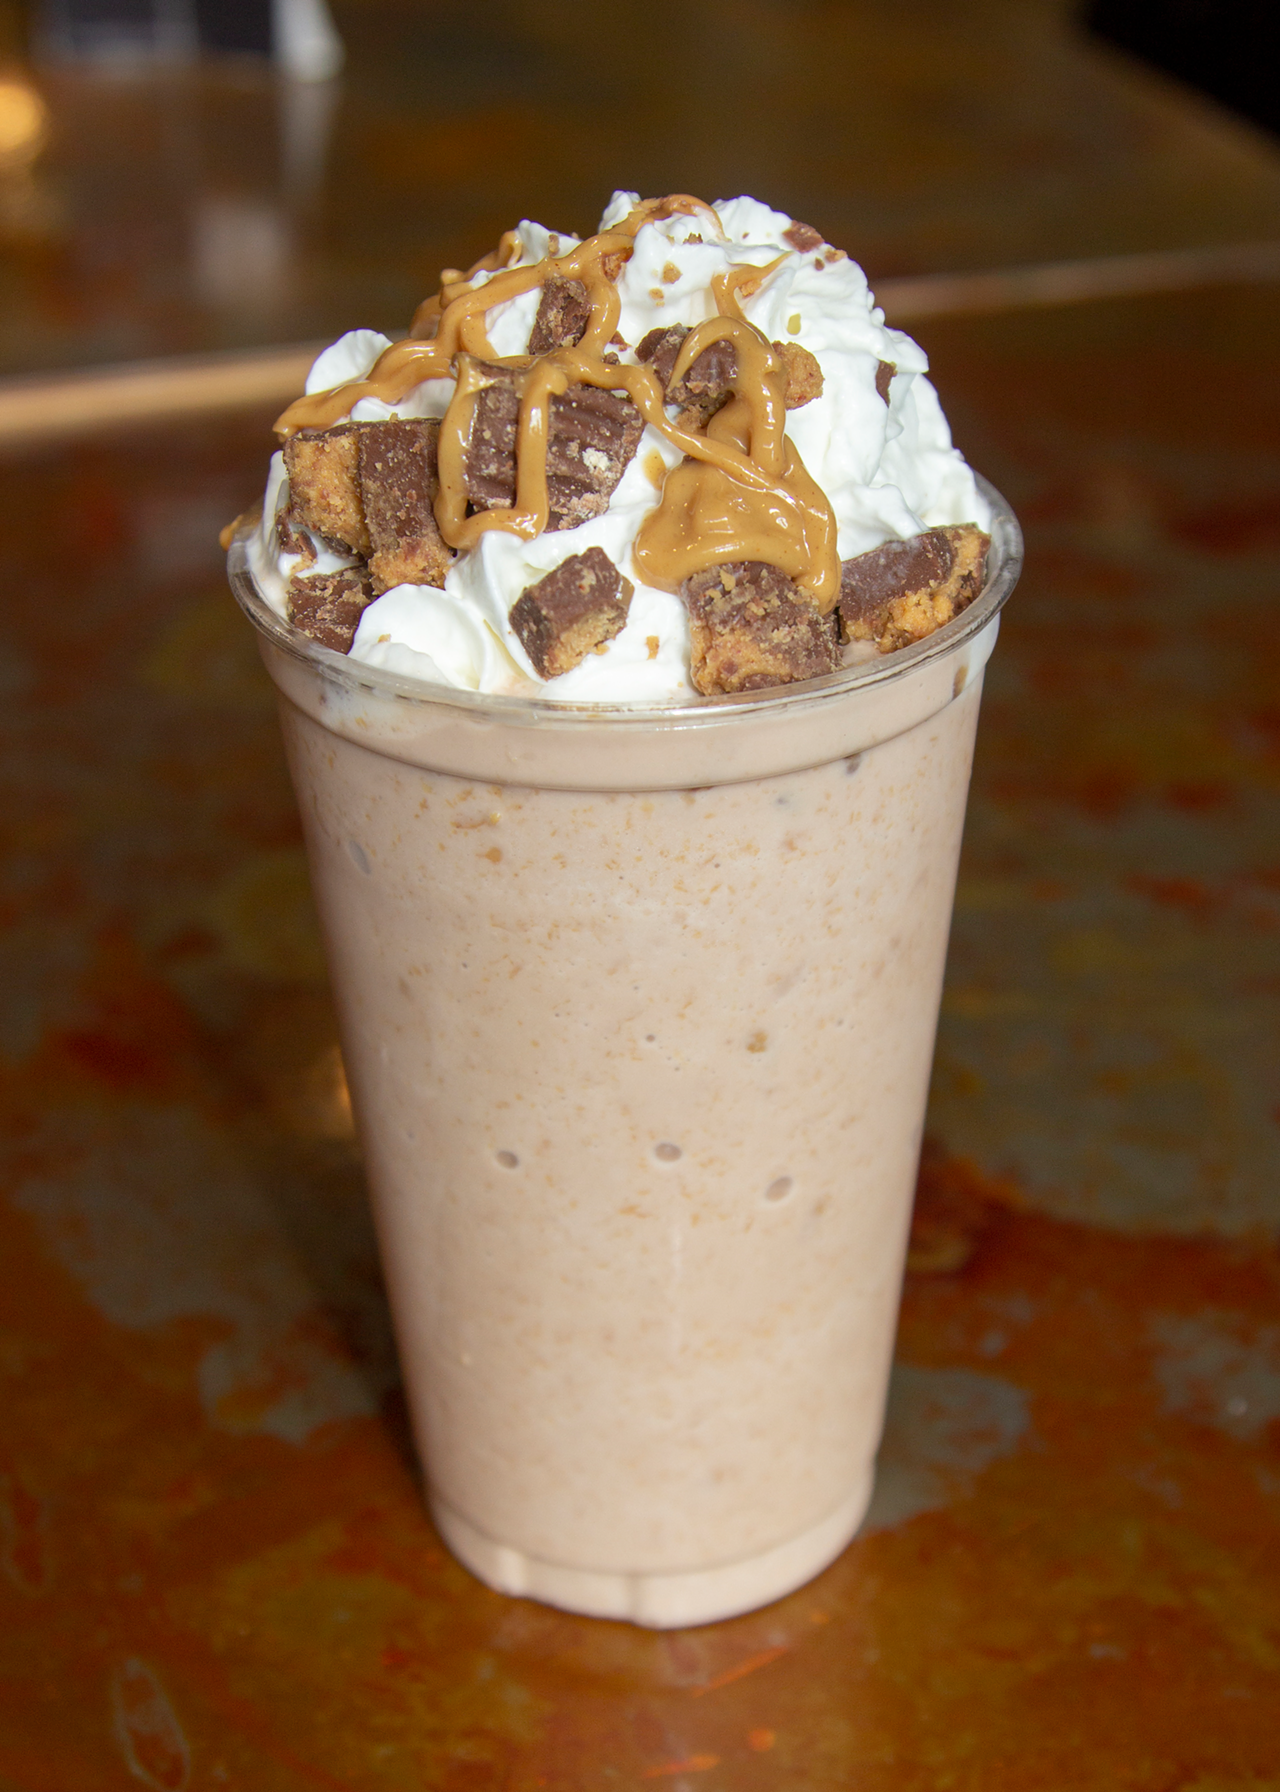 Co-owners Cole and Shane Mounce opened Buzzed Bull Creamery (1408 Main St., OTR) in May of 2017. Fan-favorite Tiger Stripes shake is a tribute to the Cincinnati Bengals. Pictured is a Tiger Stripes Nitro Milkshake with spiced rum, chocolate peanut butter flavor, peanut butter cups and peanut butter sauce—all topped with whipped cream.